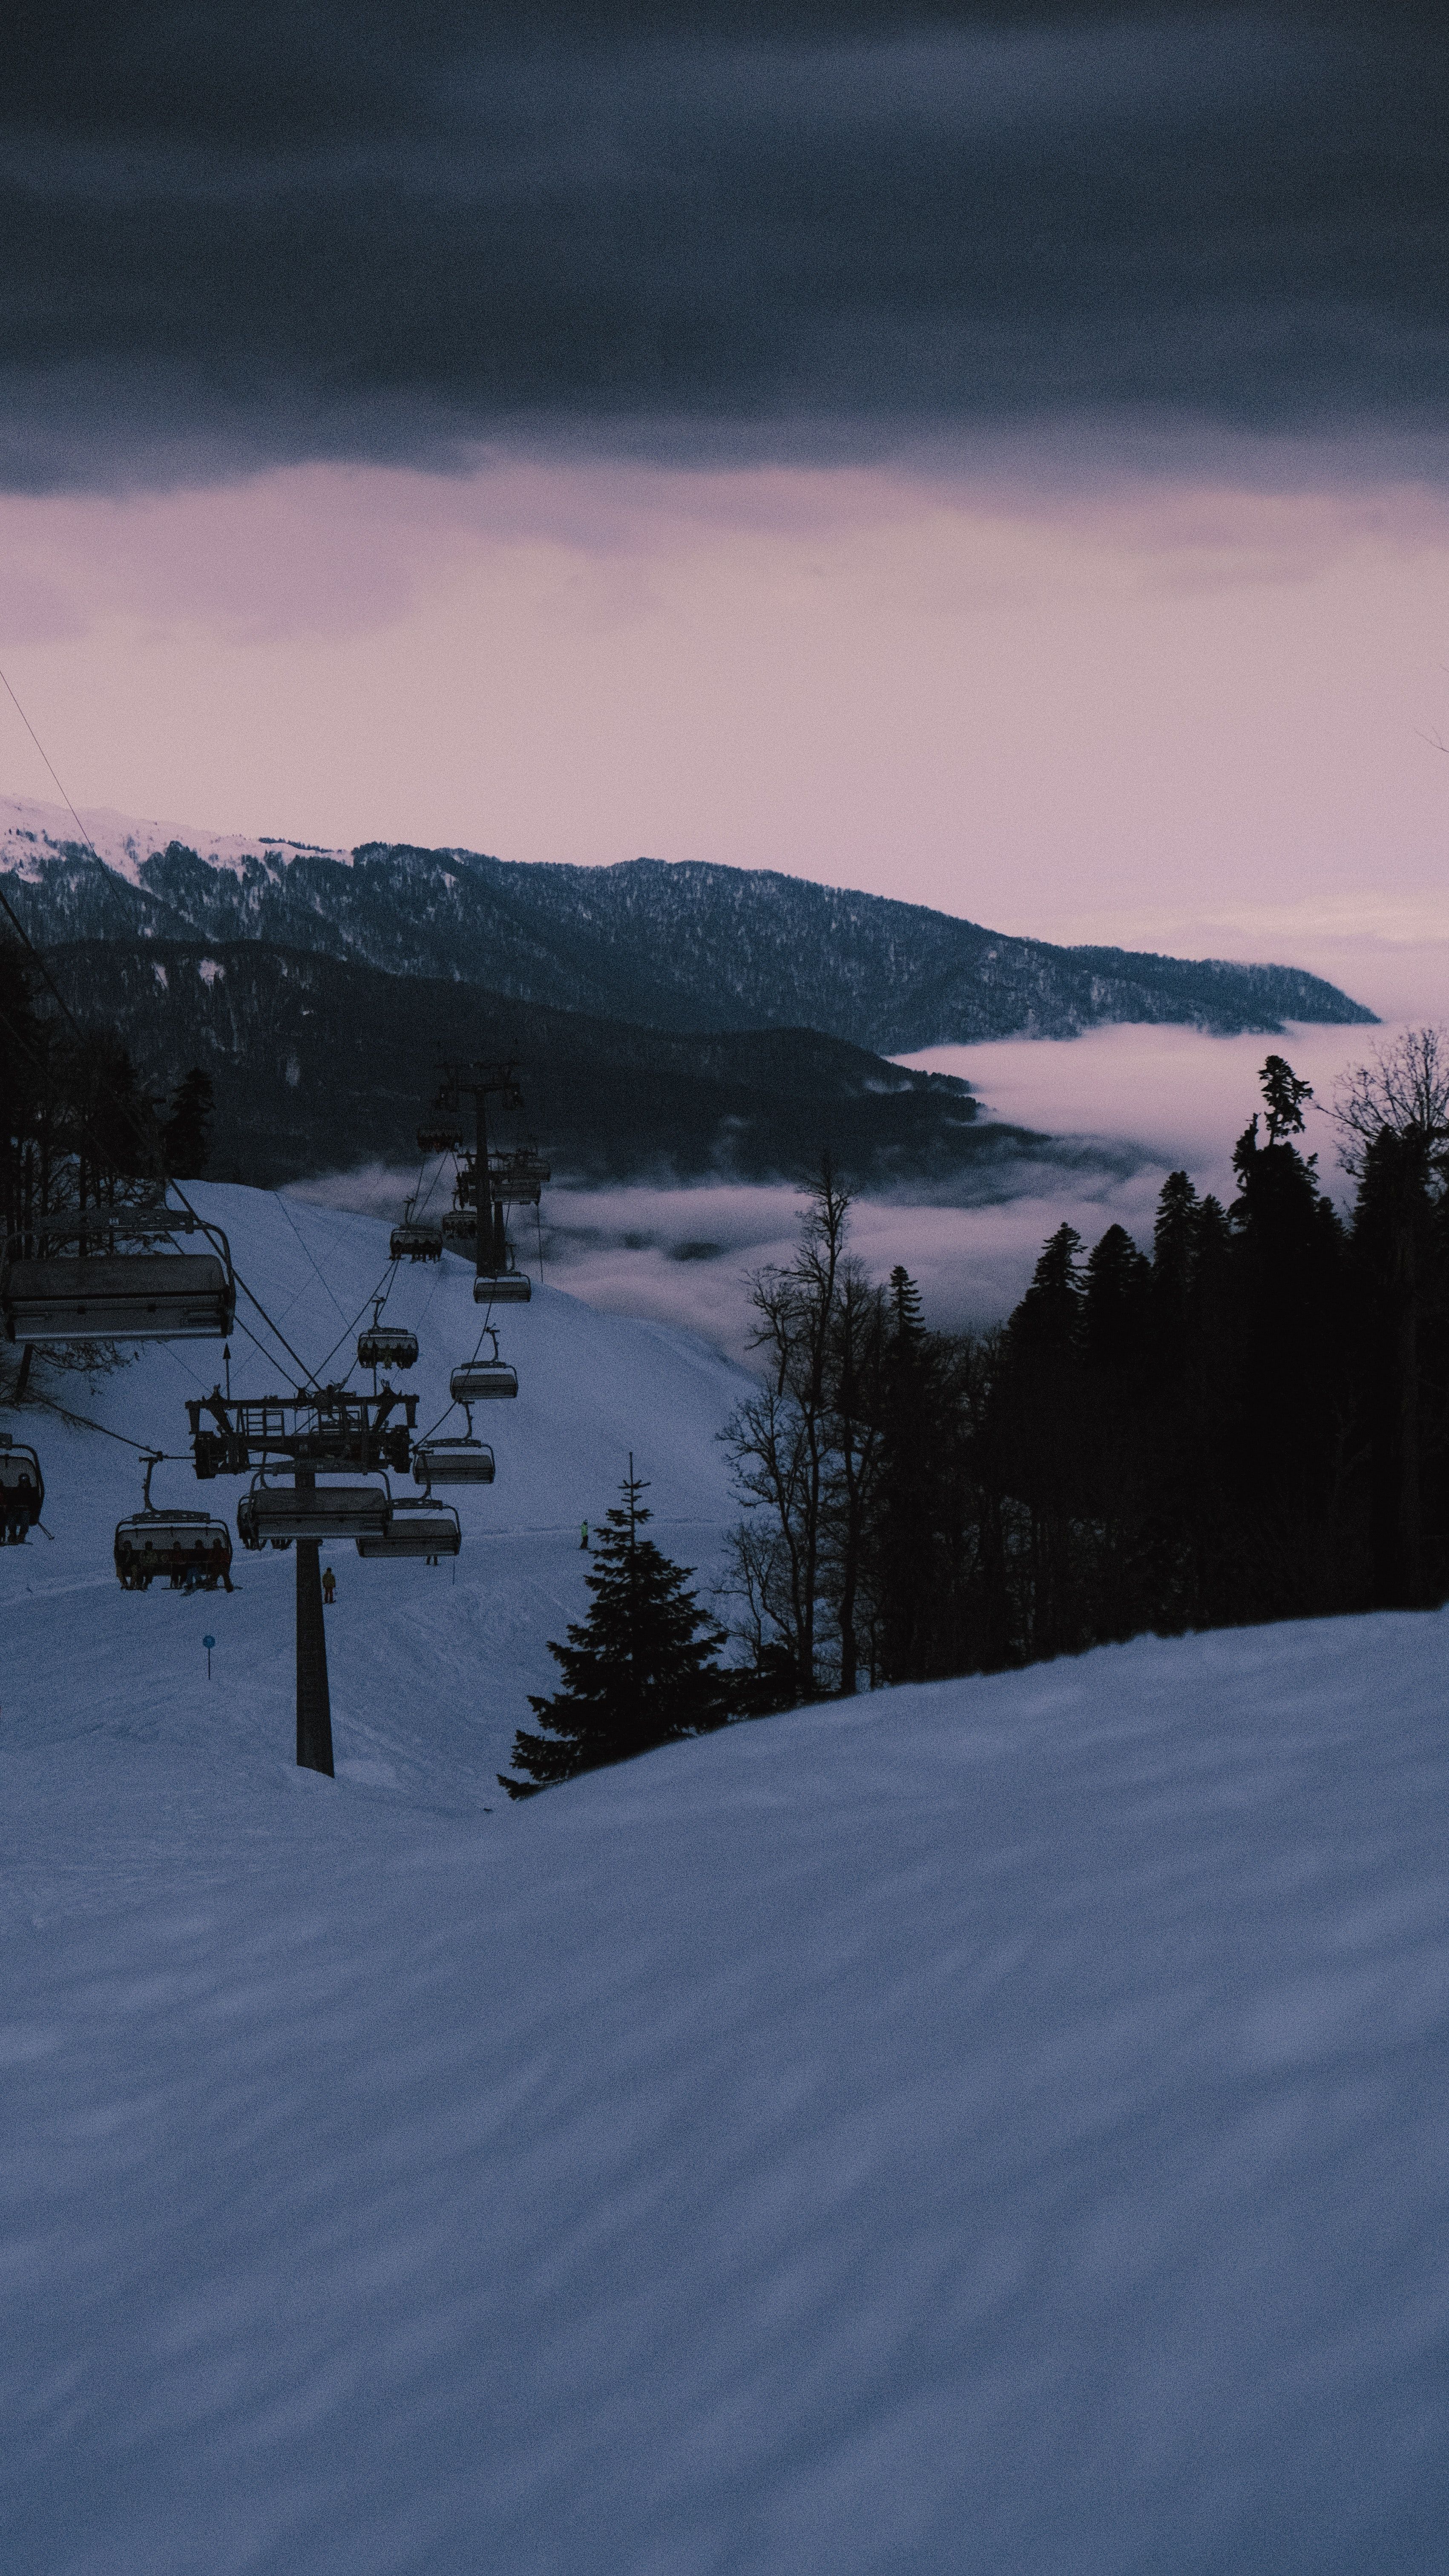 A ski lift is seen at dusk in the snow. - Ski